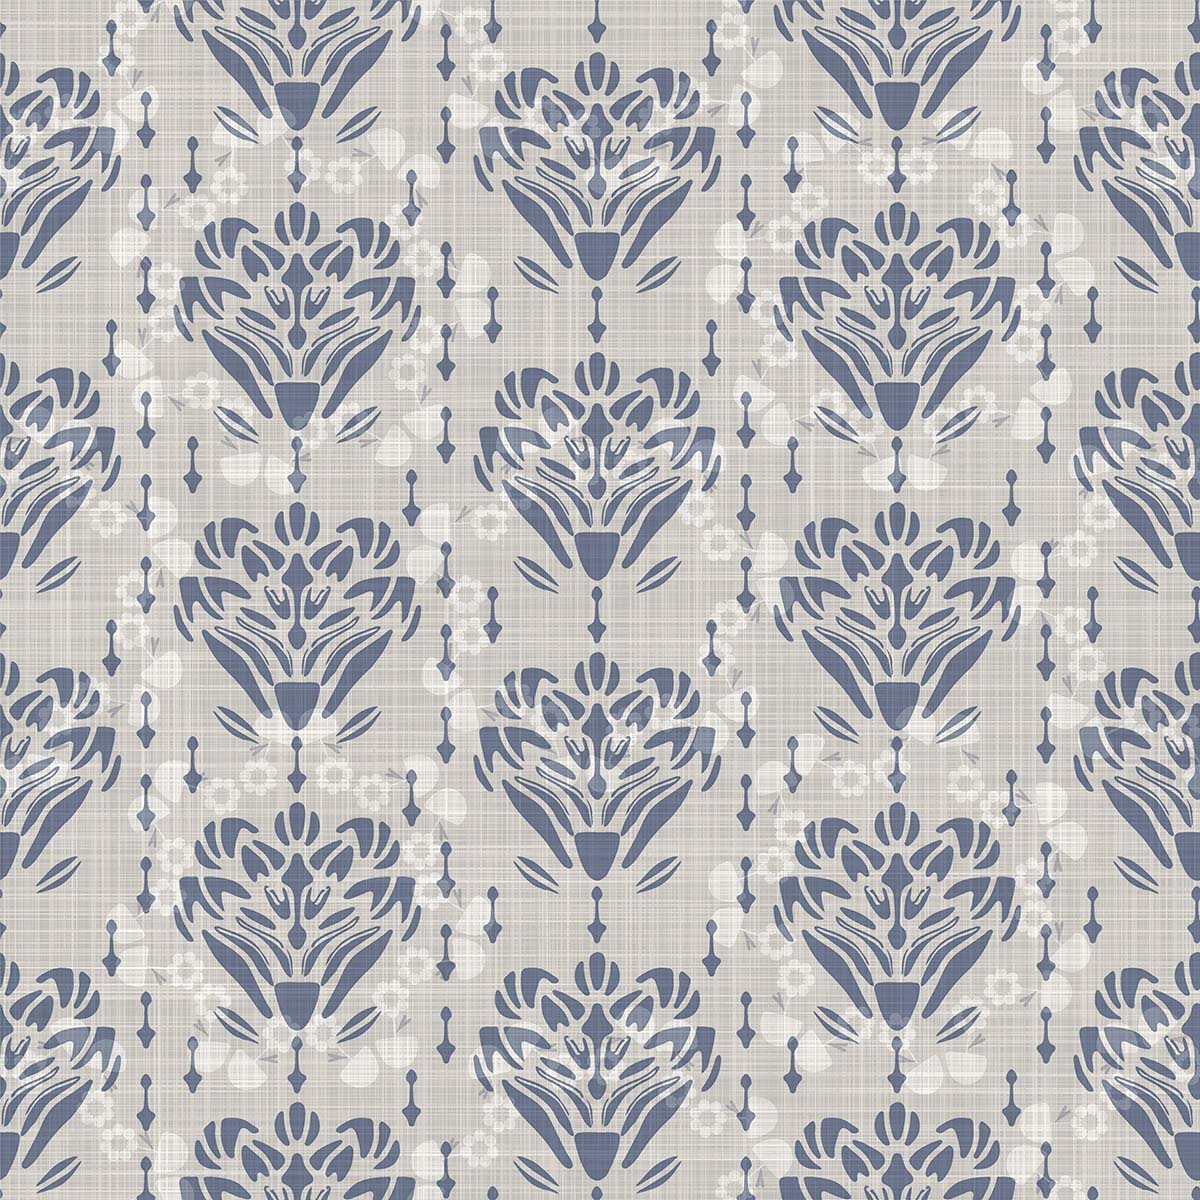 A blue and white floral pattern on a linen fabric